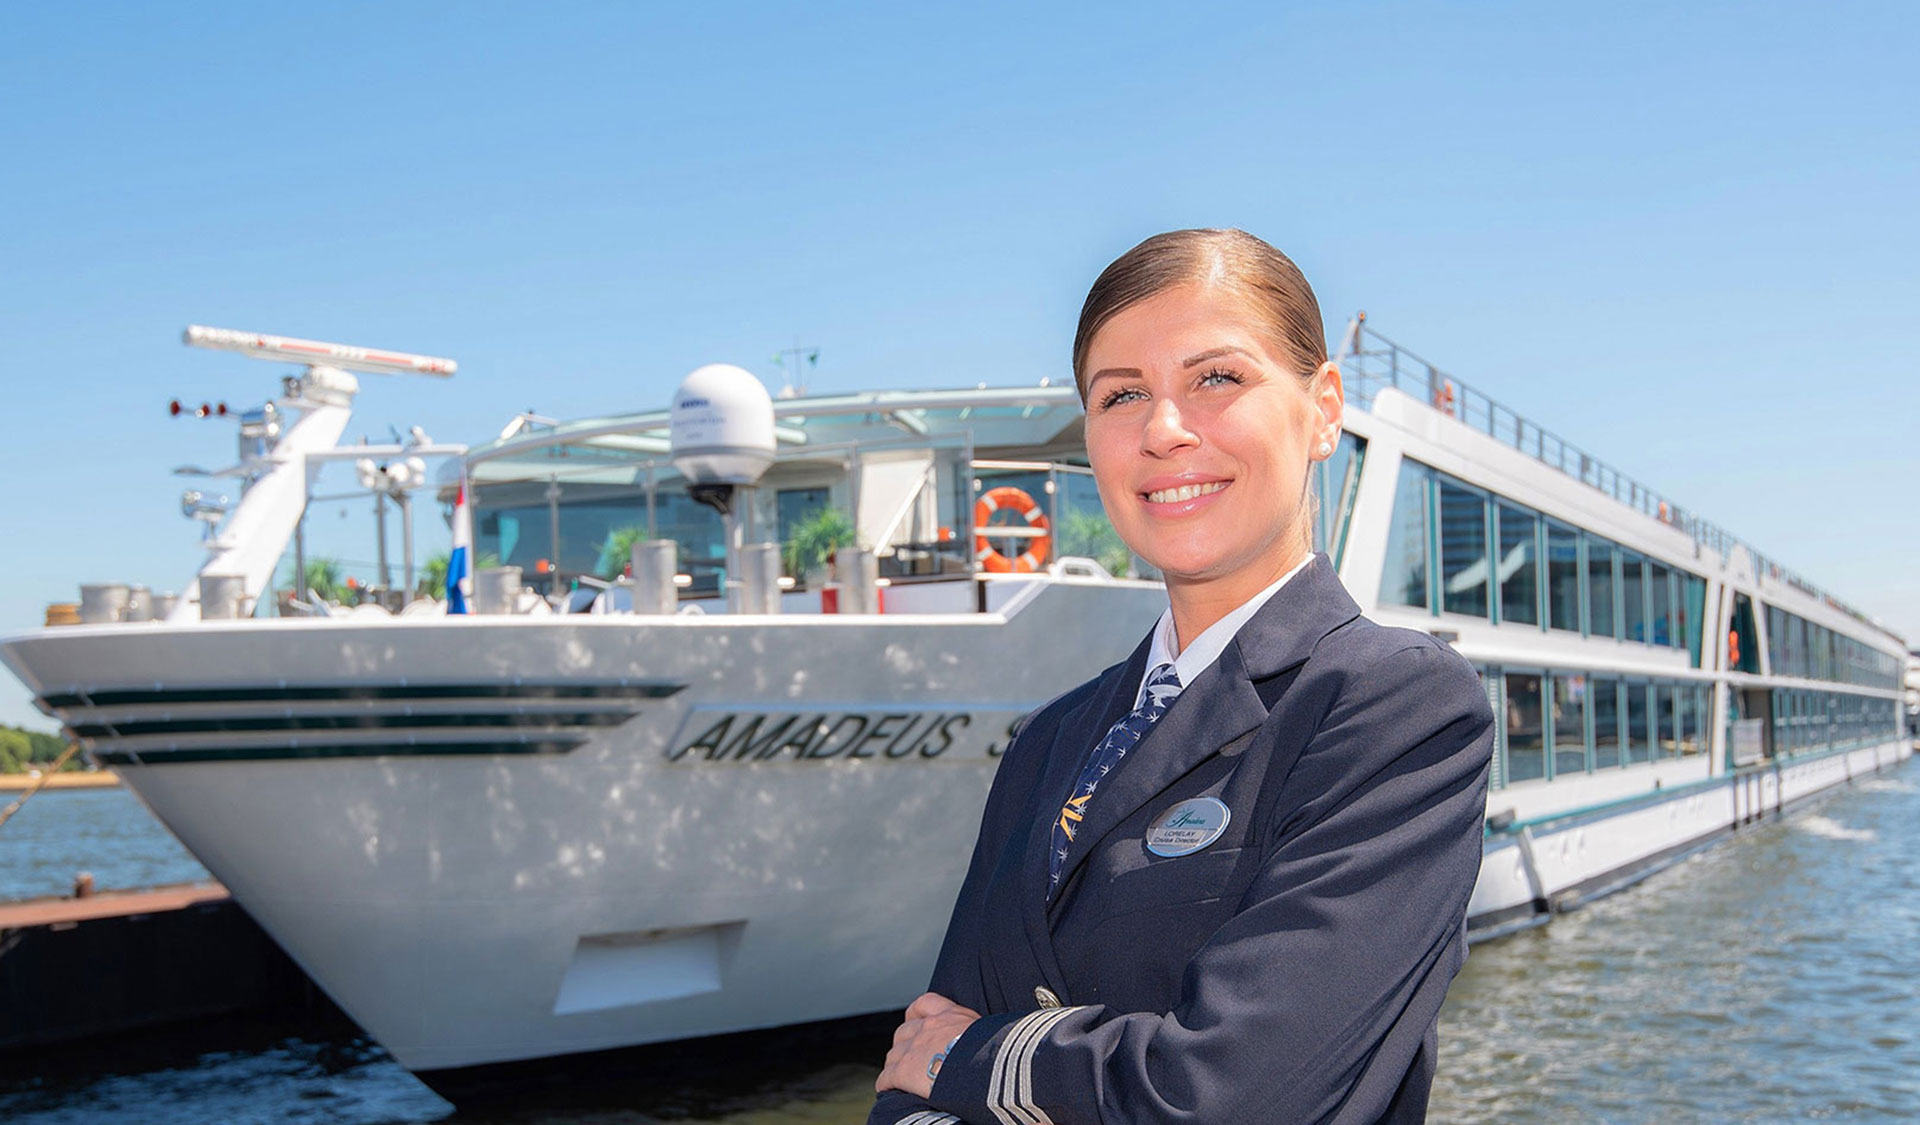 river cruise careers